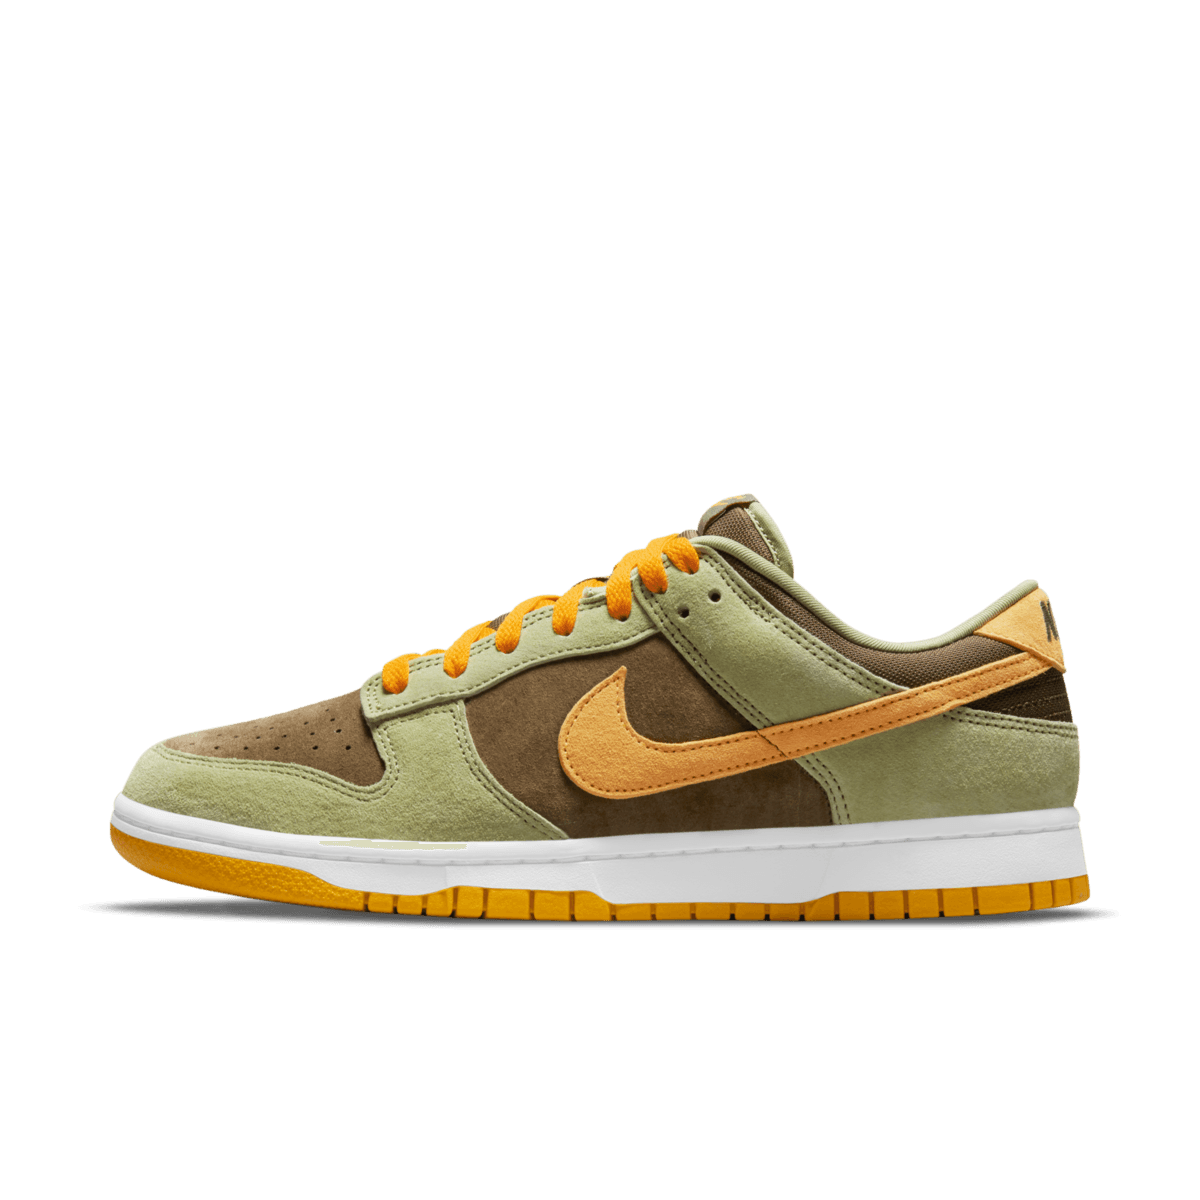 Nike Dunk Low SE 'Dusty Olive' DH5360-300